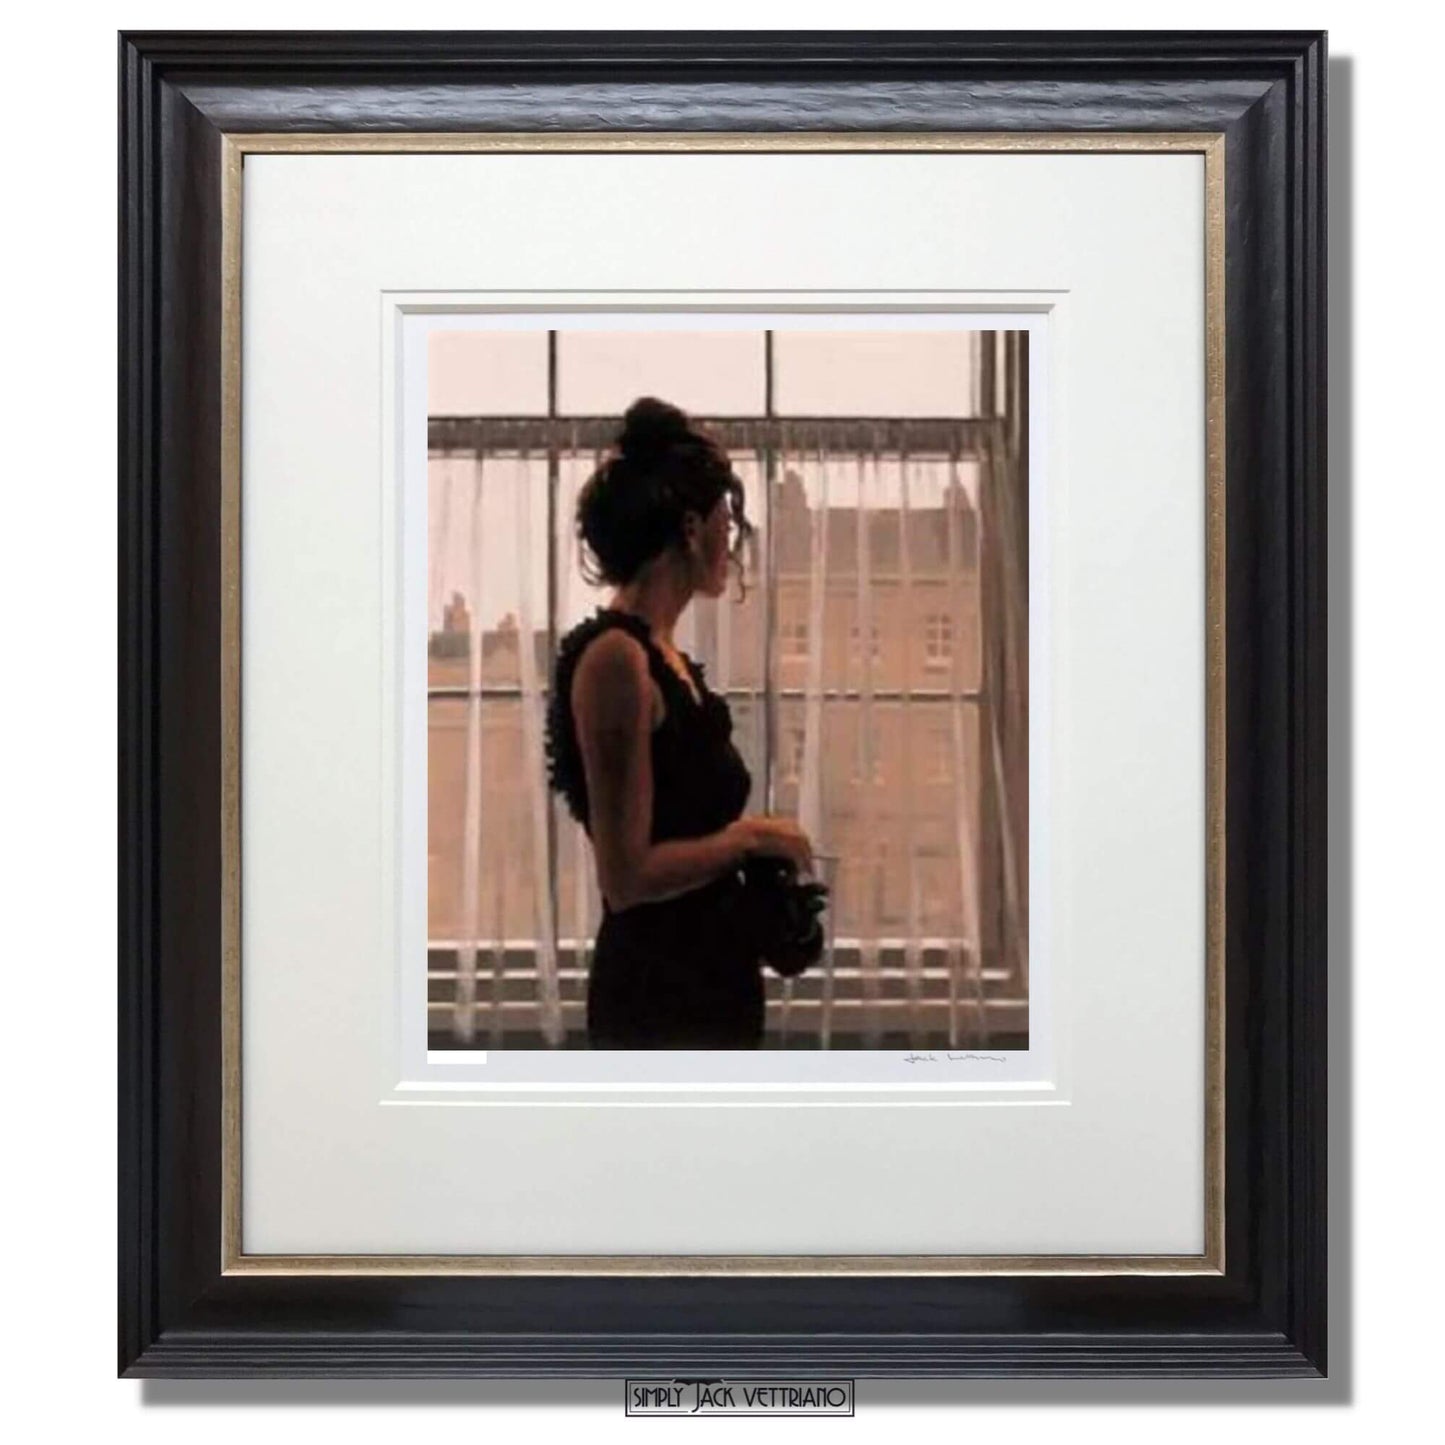 Yesterdays Dreams by Jack Vettriano Limited Edition Framed